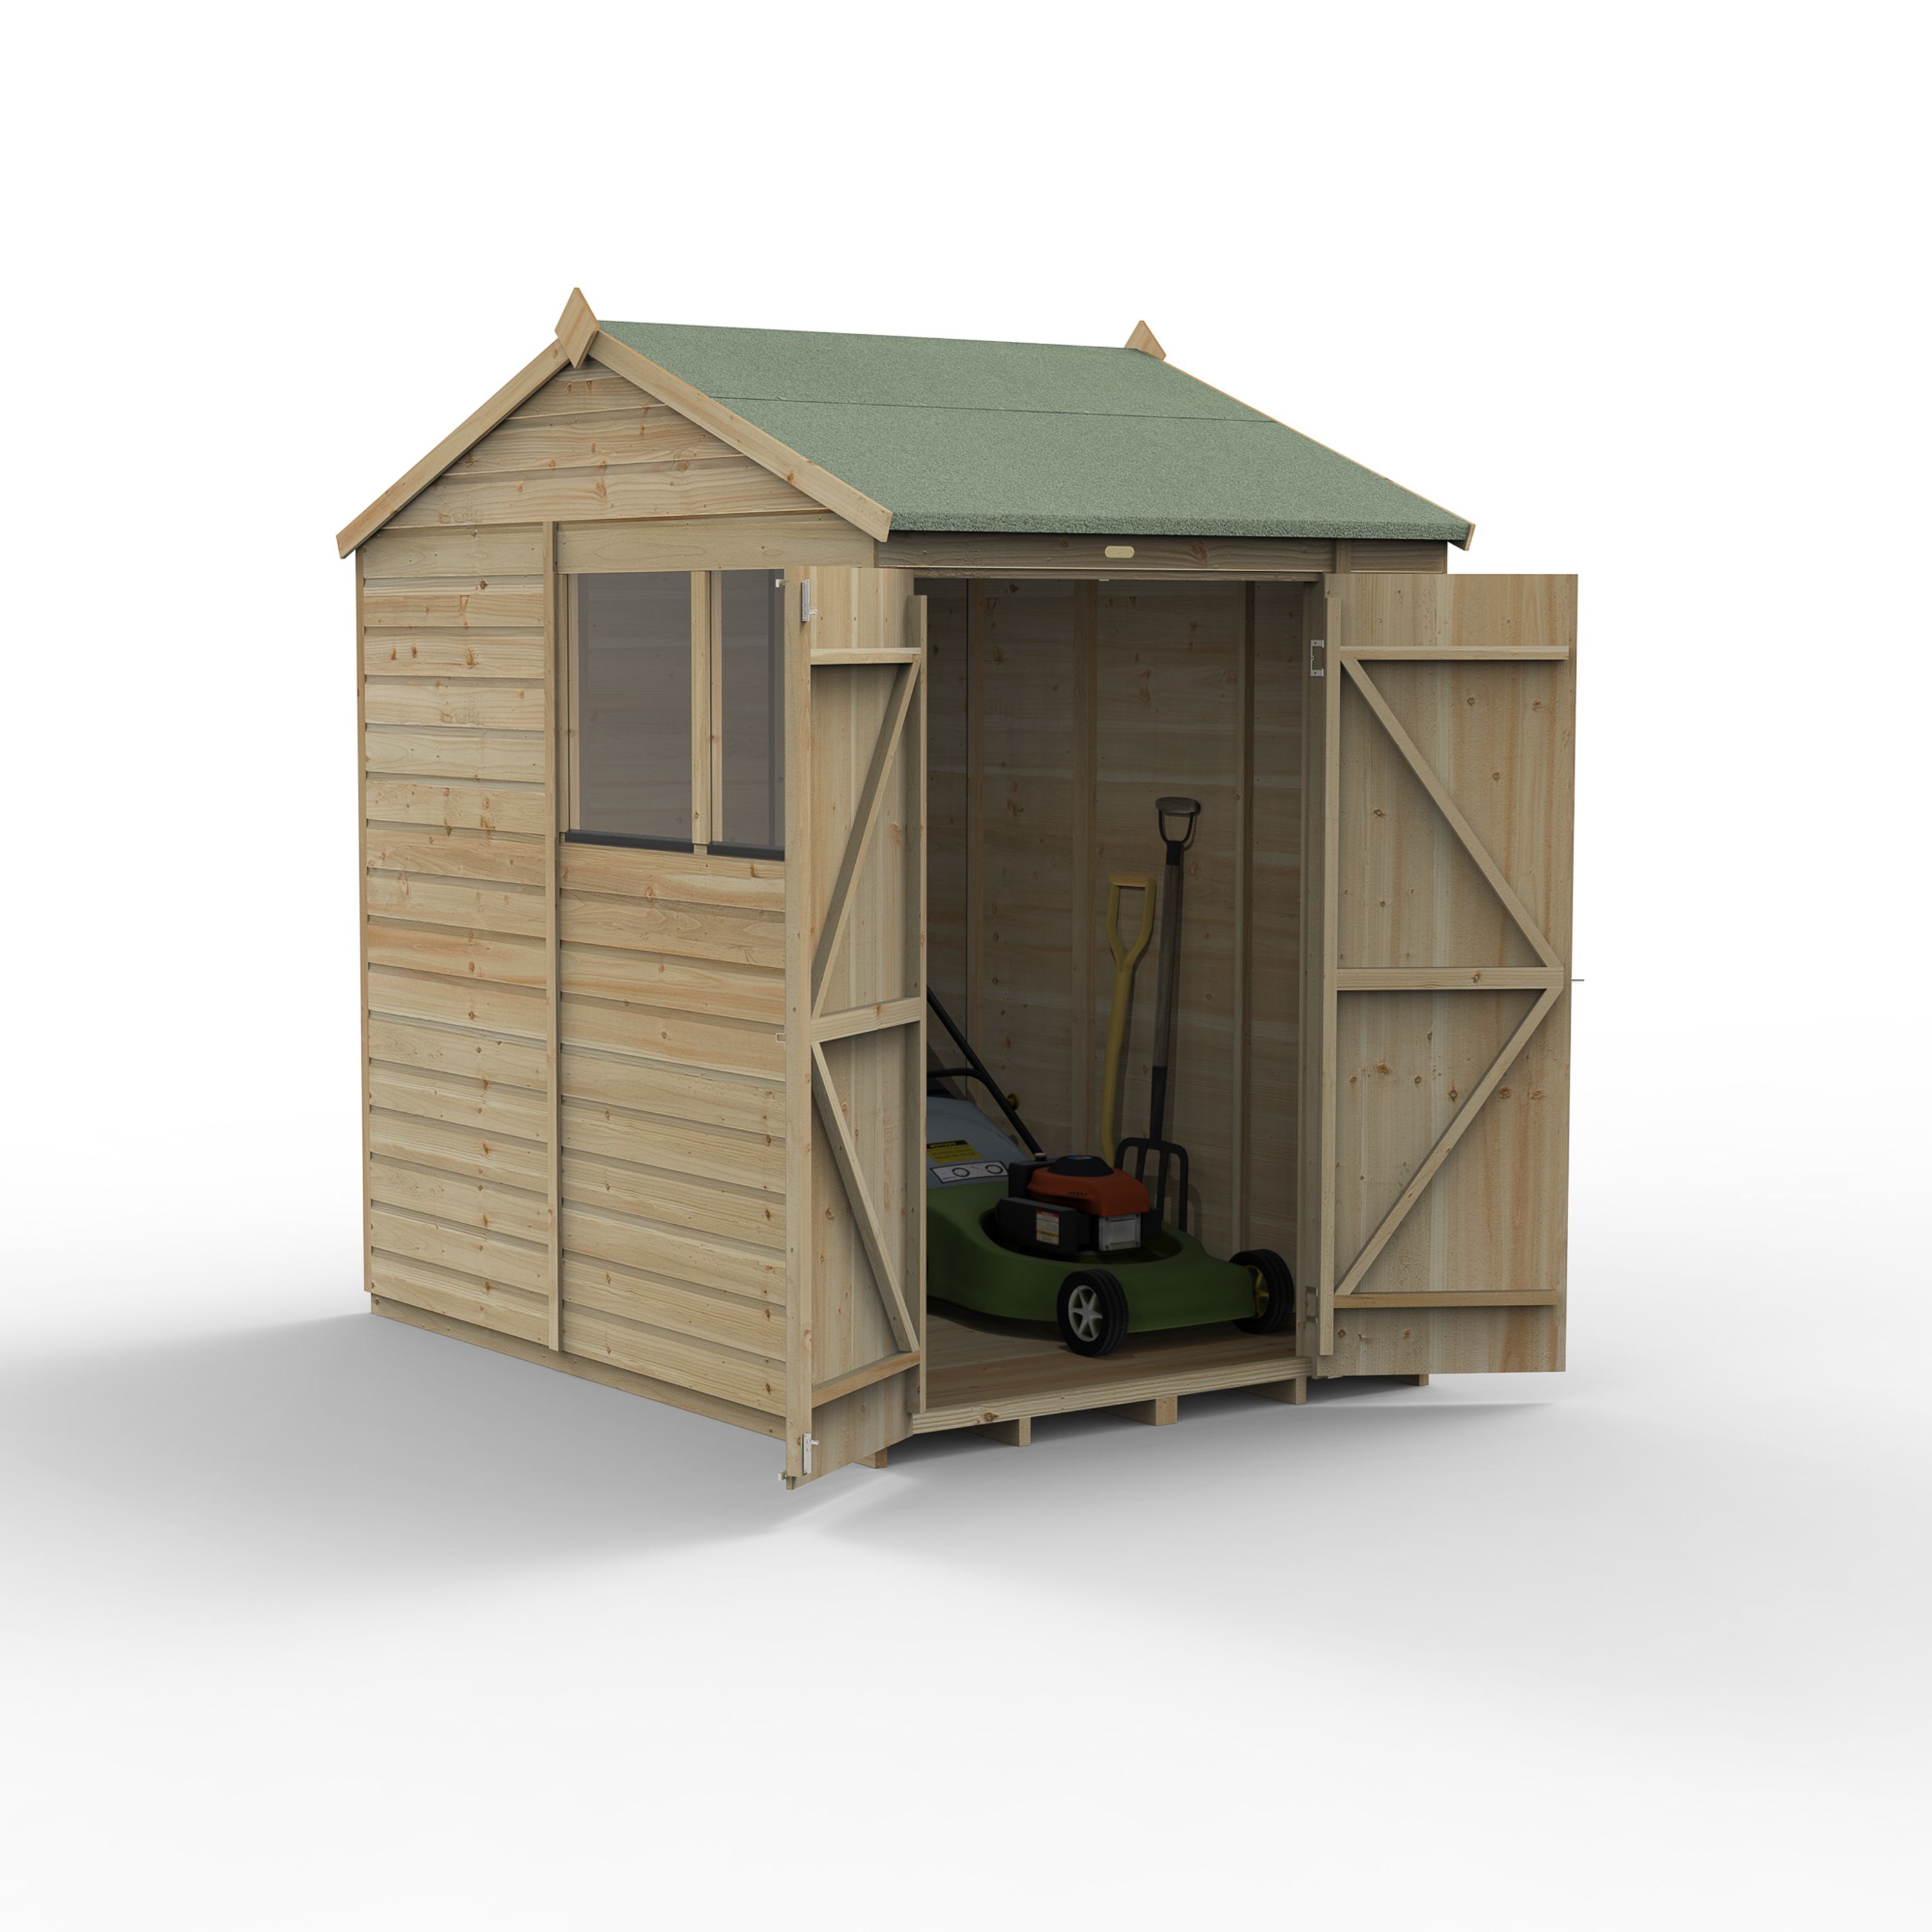 Forest Garden Beckwood 7x5 ft Reverse apex Natural timber Wooden 2 door Shed with floor & 2 windows (Base included)